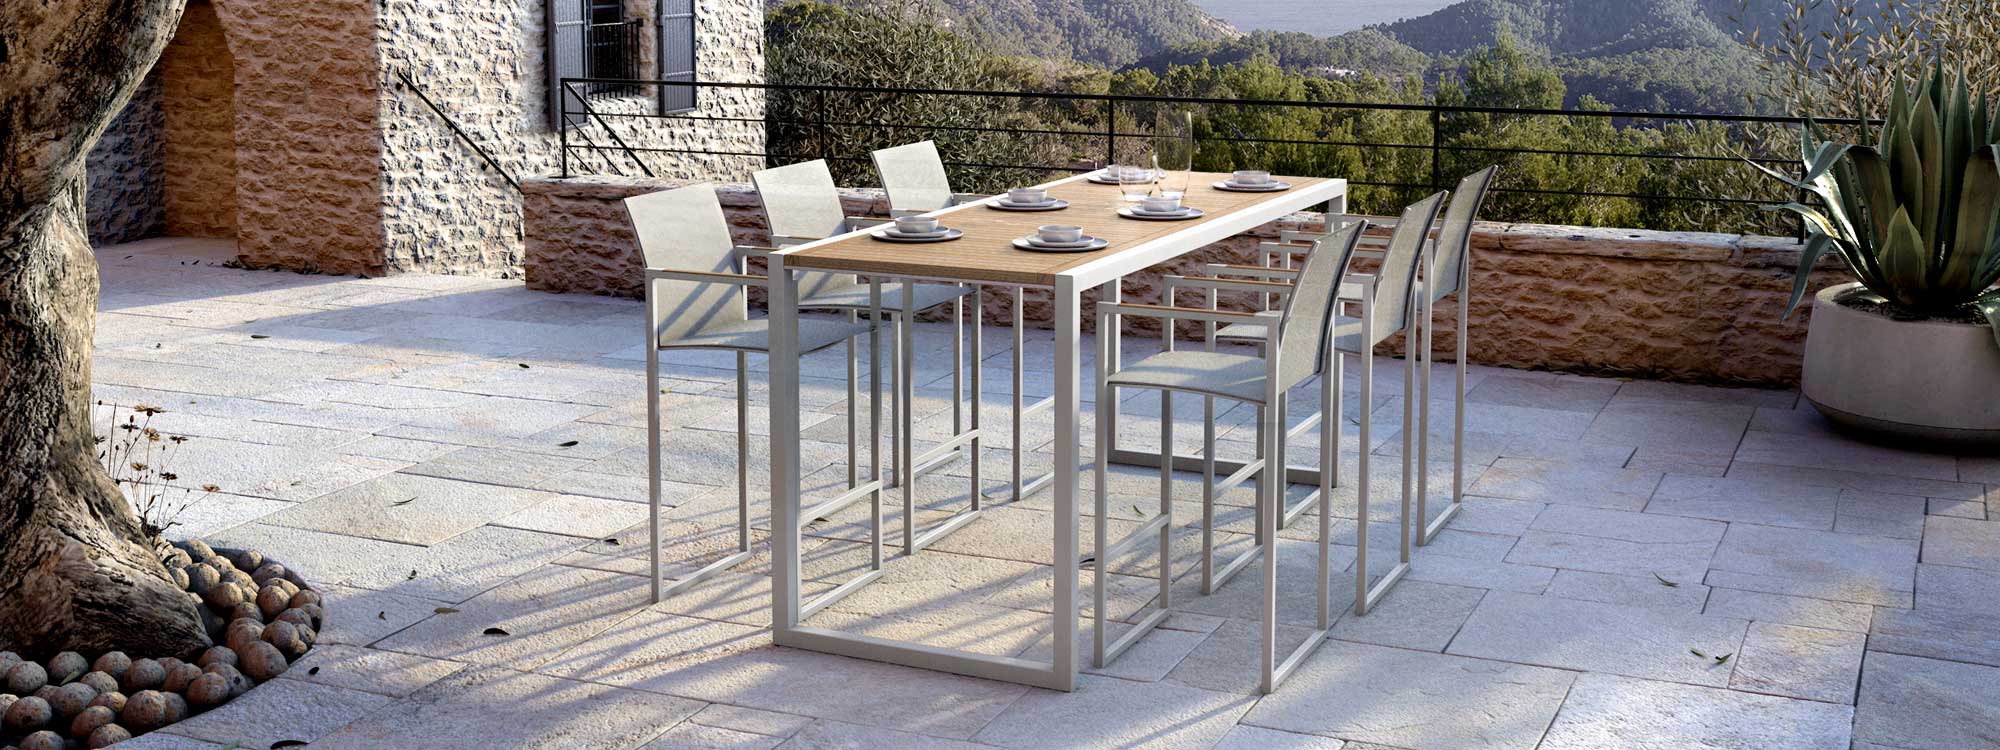 Image of Royal Botania Ninix high table with teak top and bar stools in sand finish on rustic terrace with rolling countryside in background